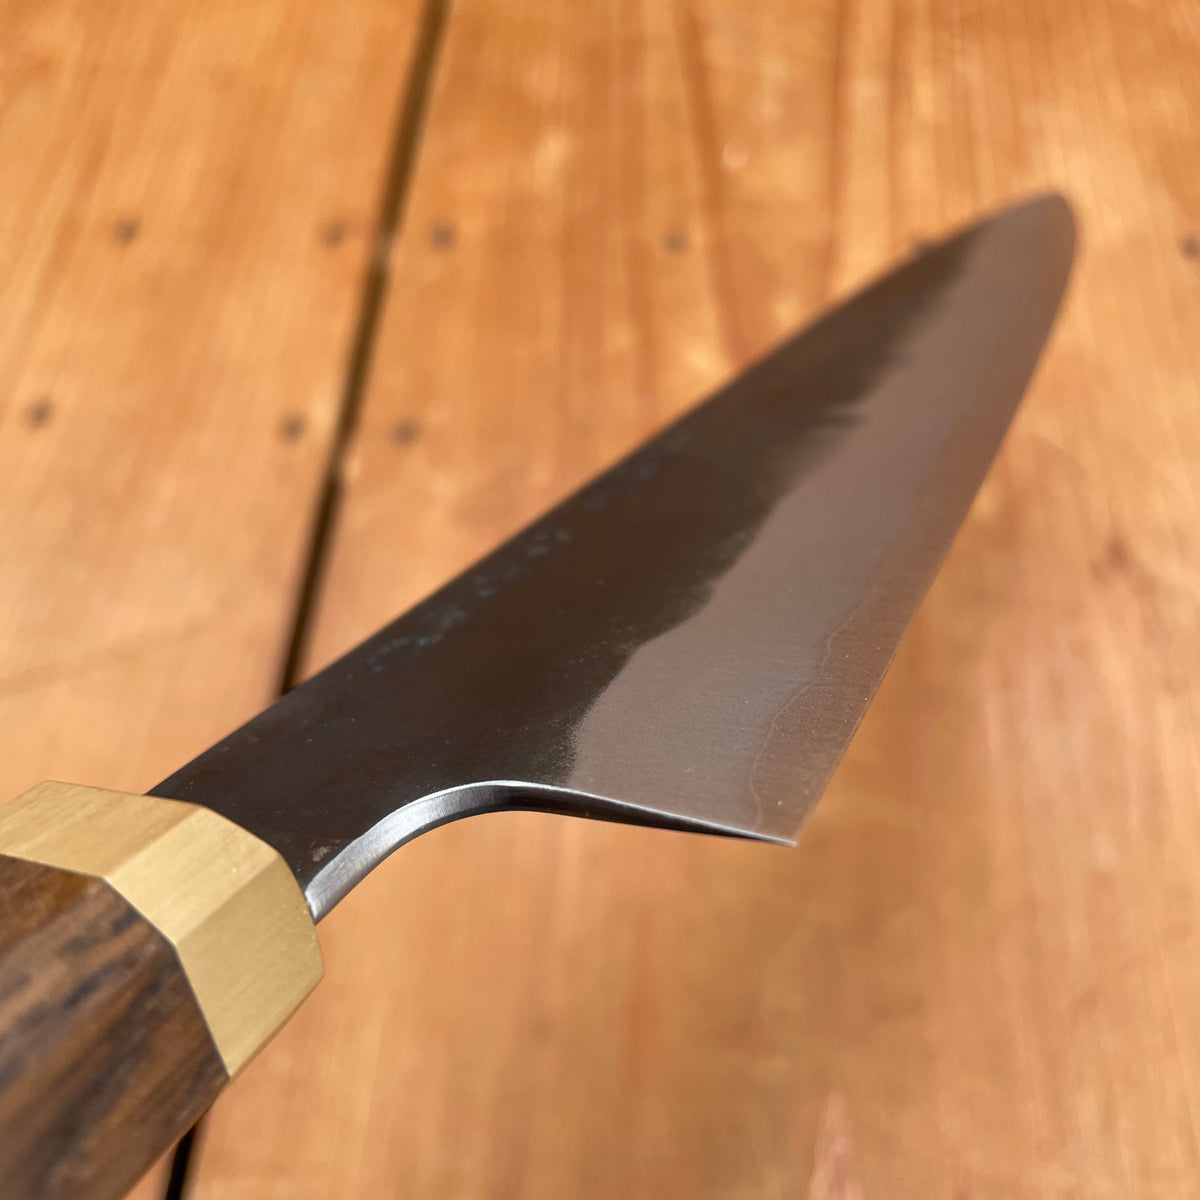 Blenheim Forge X BC 200mm Gyuto Stainless Clad Aogami Super Oak & Brass